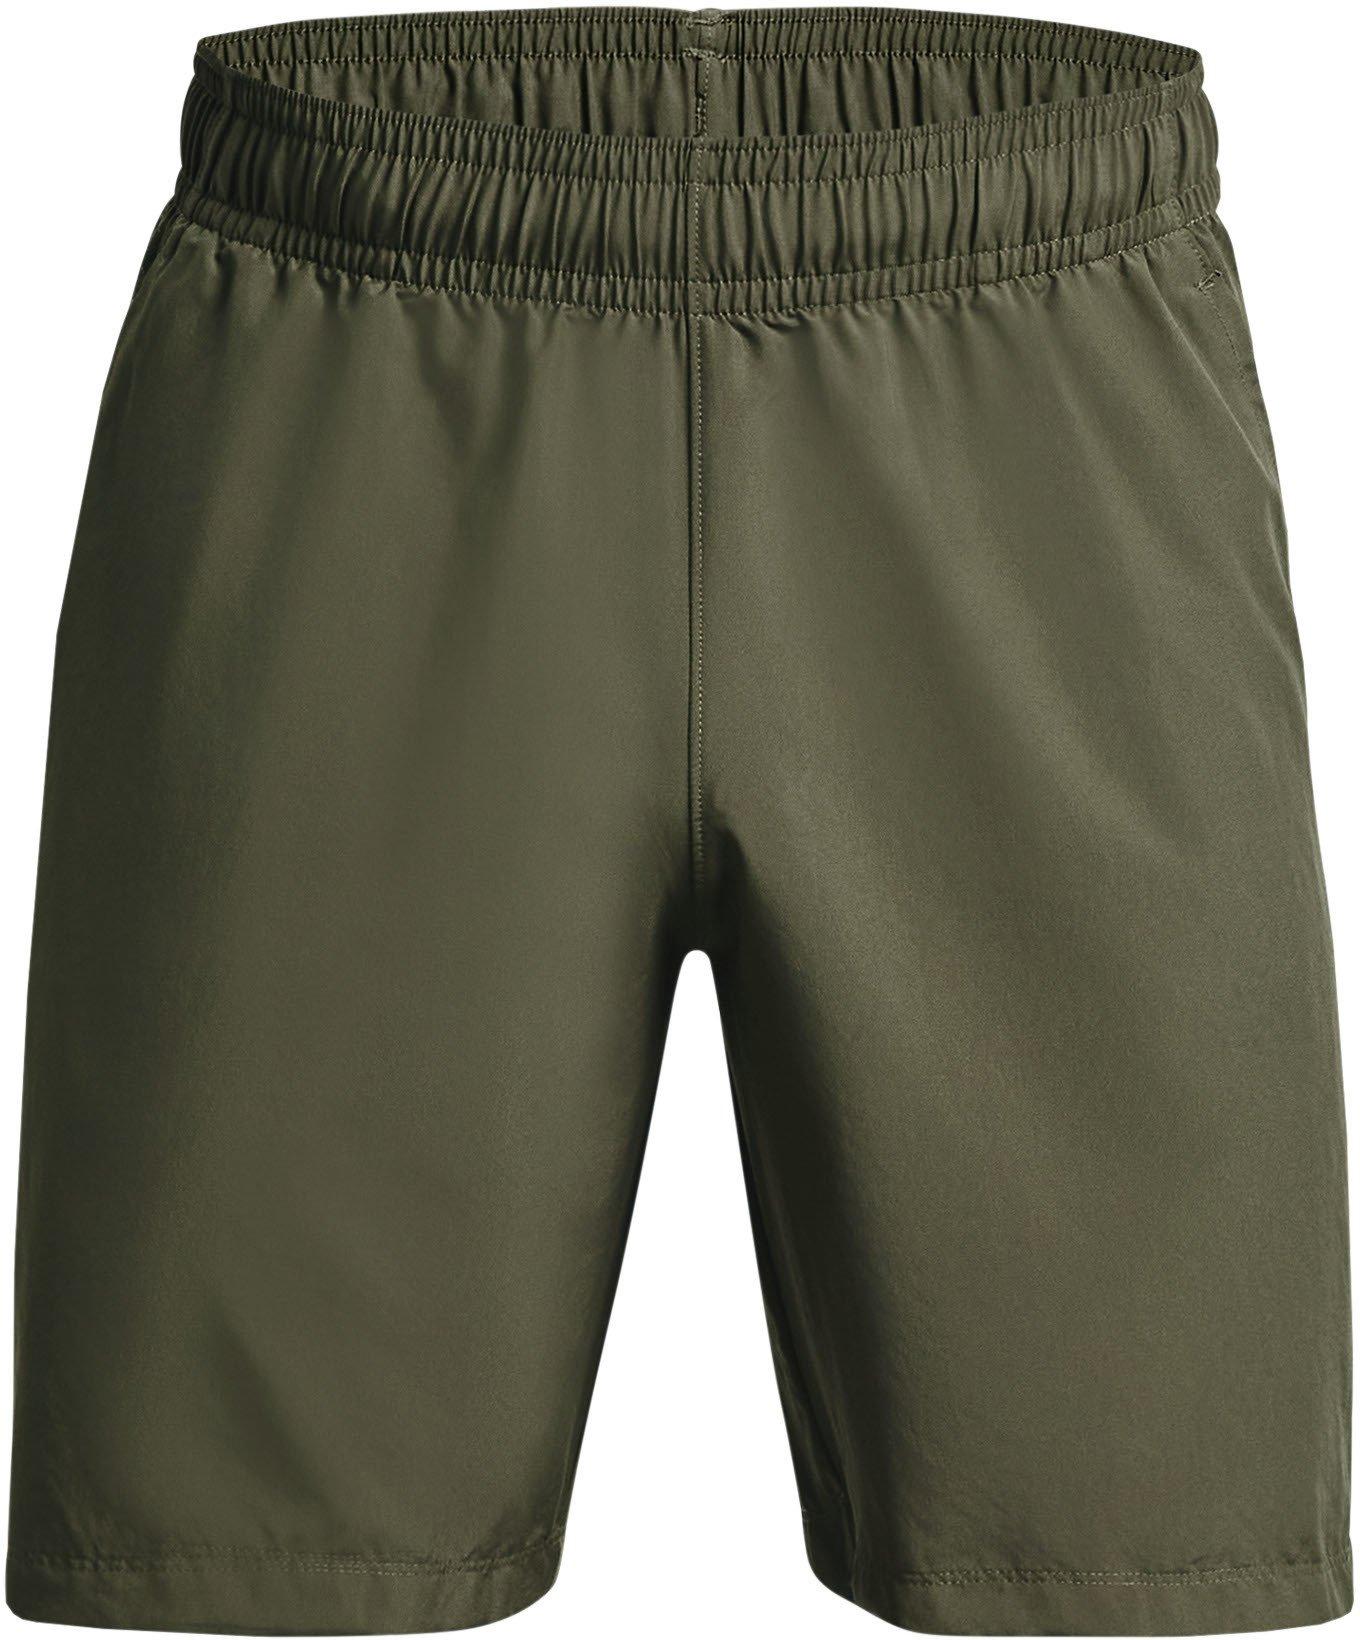 Under Armour Woven Graphic Shorts-GRN 3XL